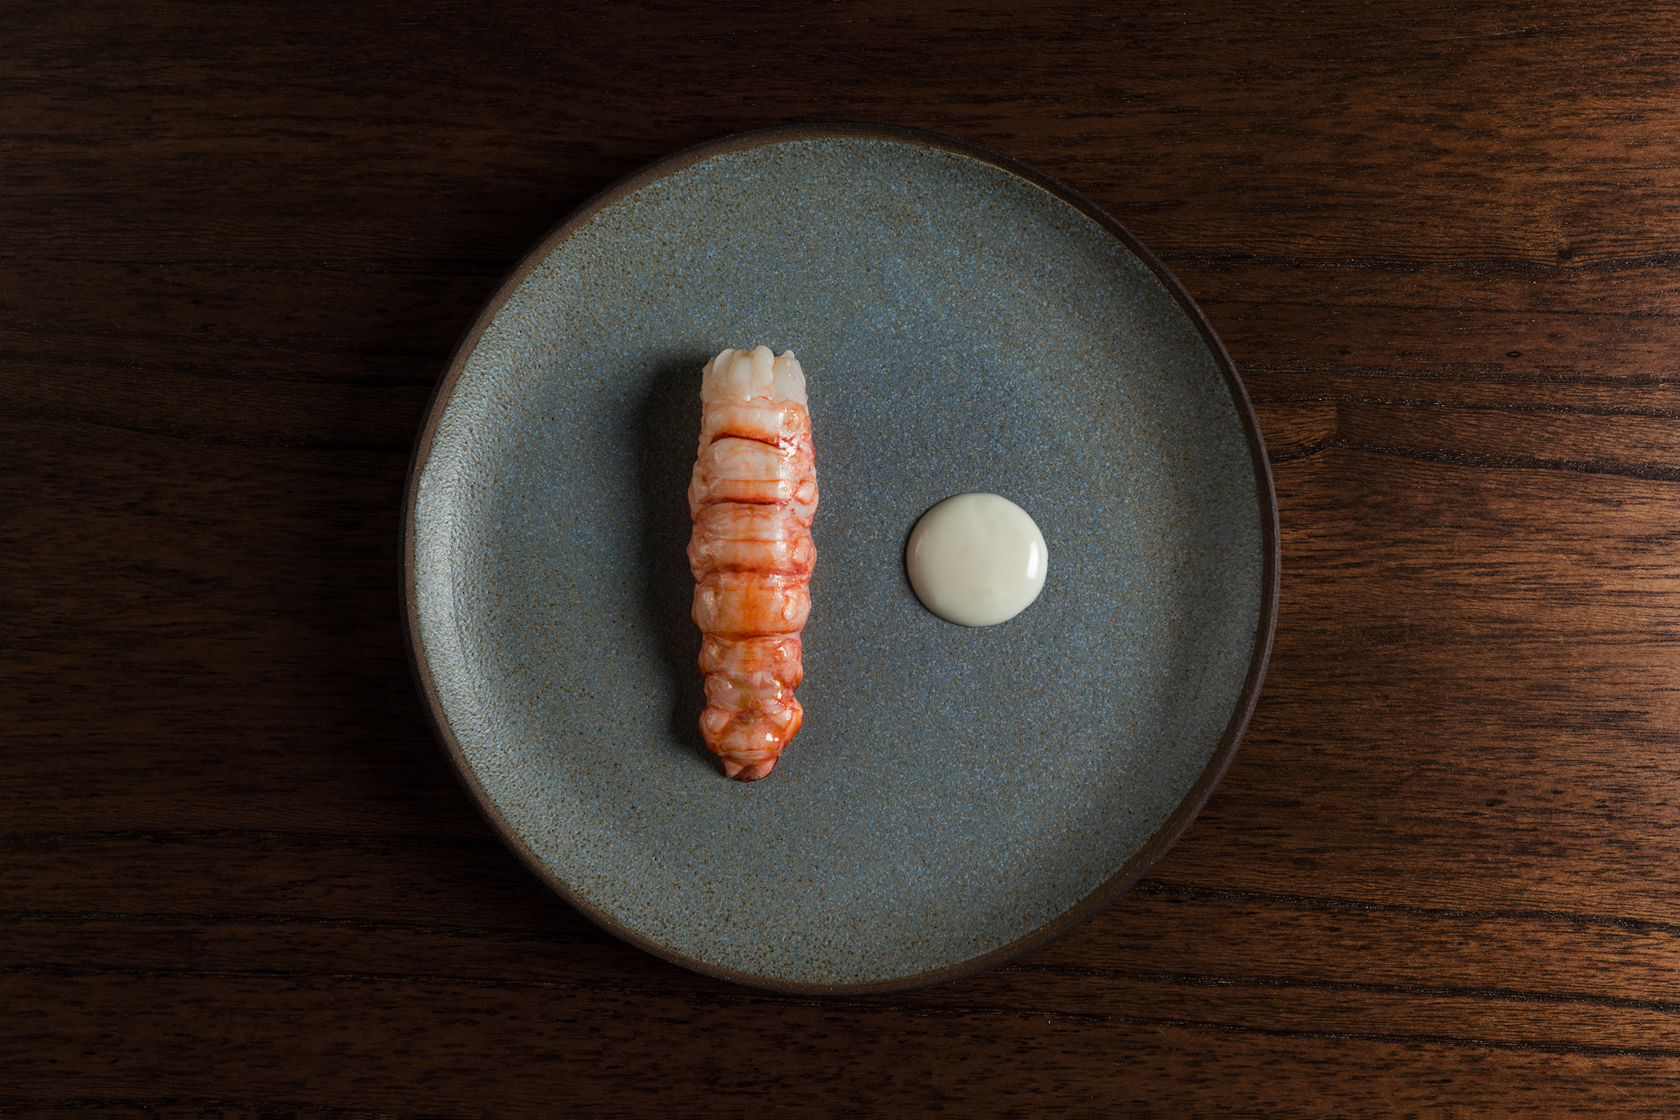 A piece of prawn or similar meat next to a small circle of white sauce on a gray stoneware plate on a wooden surface